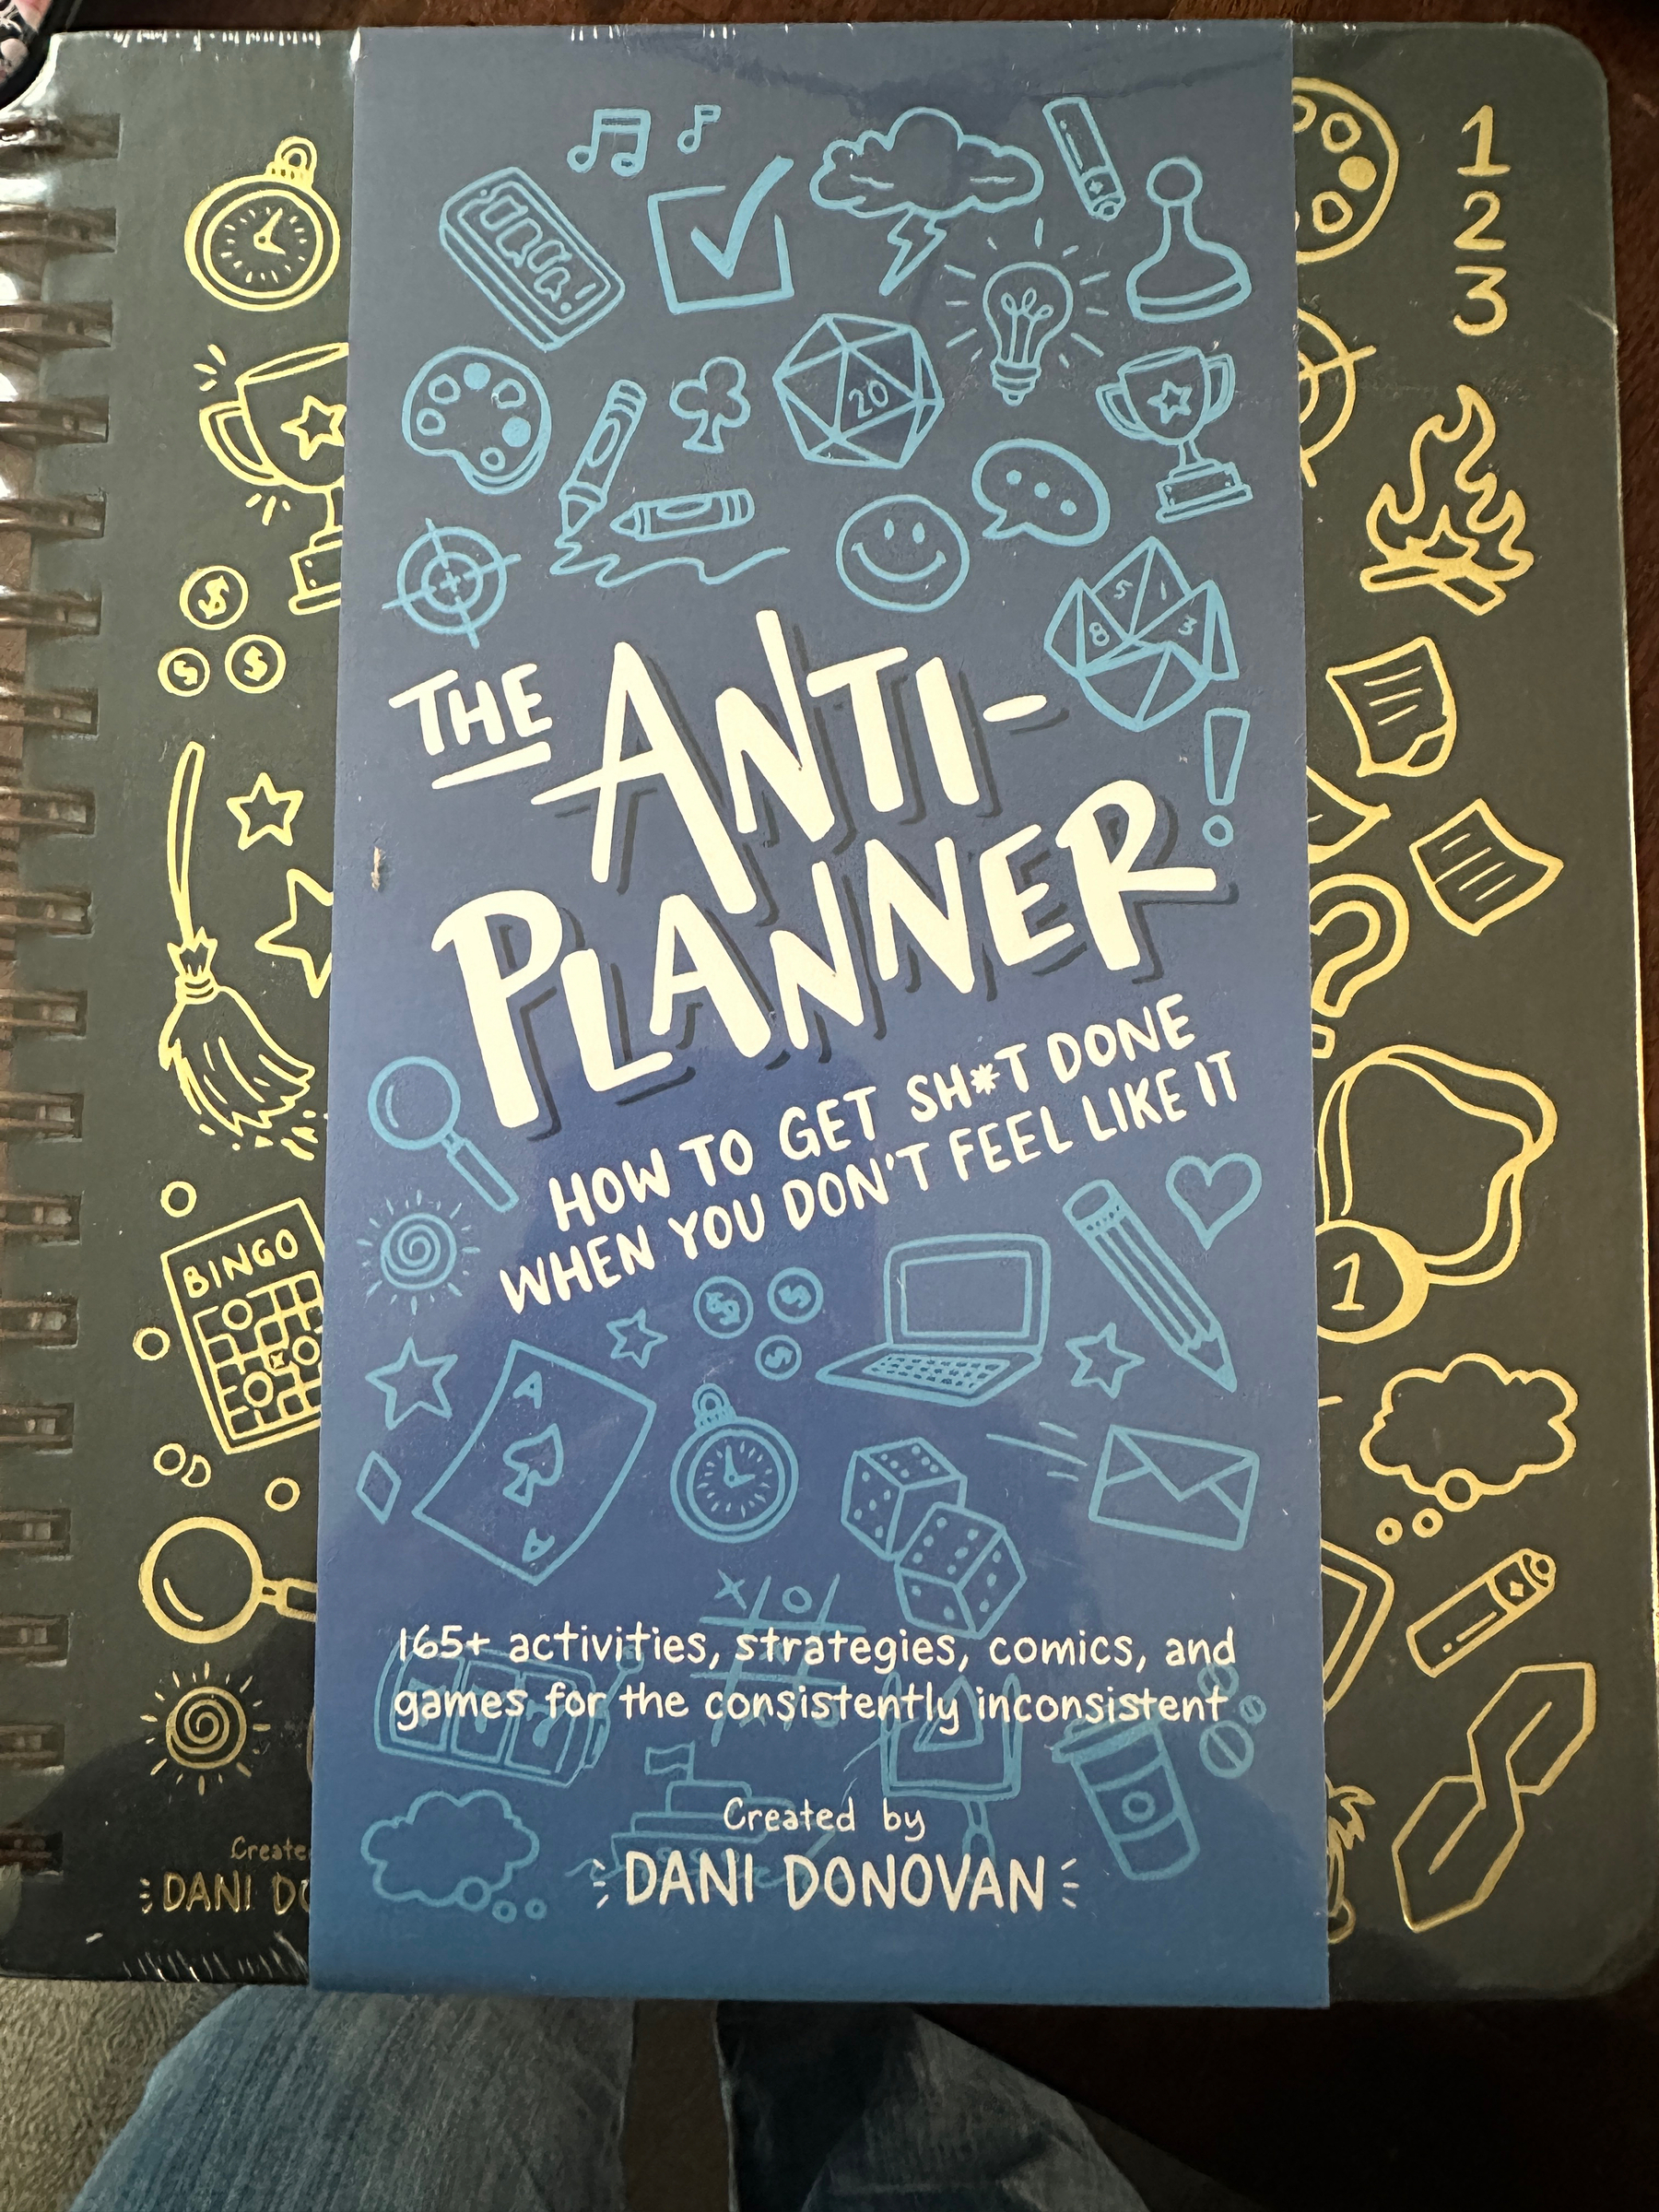 Very large activity book for procrastinators and those with ADHD The Anti-Planner: How to Get Sh!t Done When You Don’t Feel Like It. Created by Dani Donovan